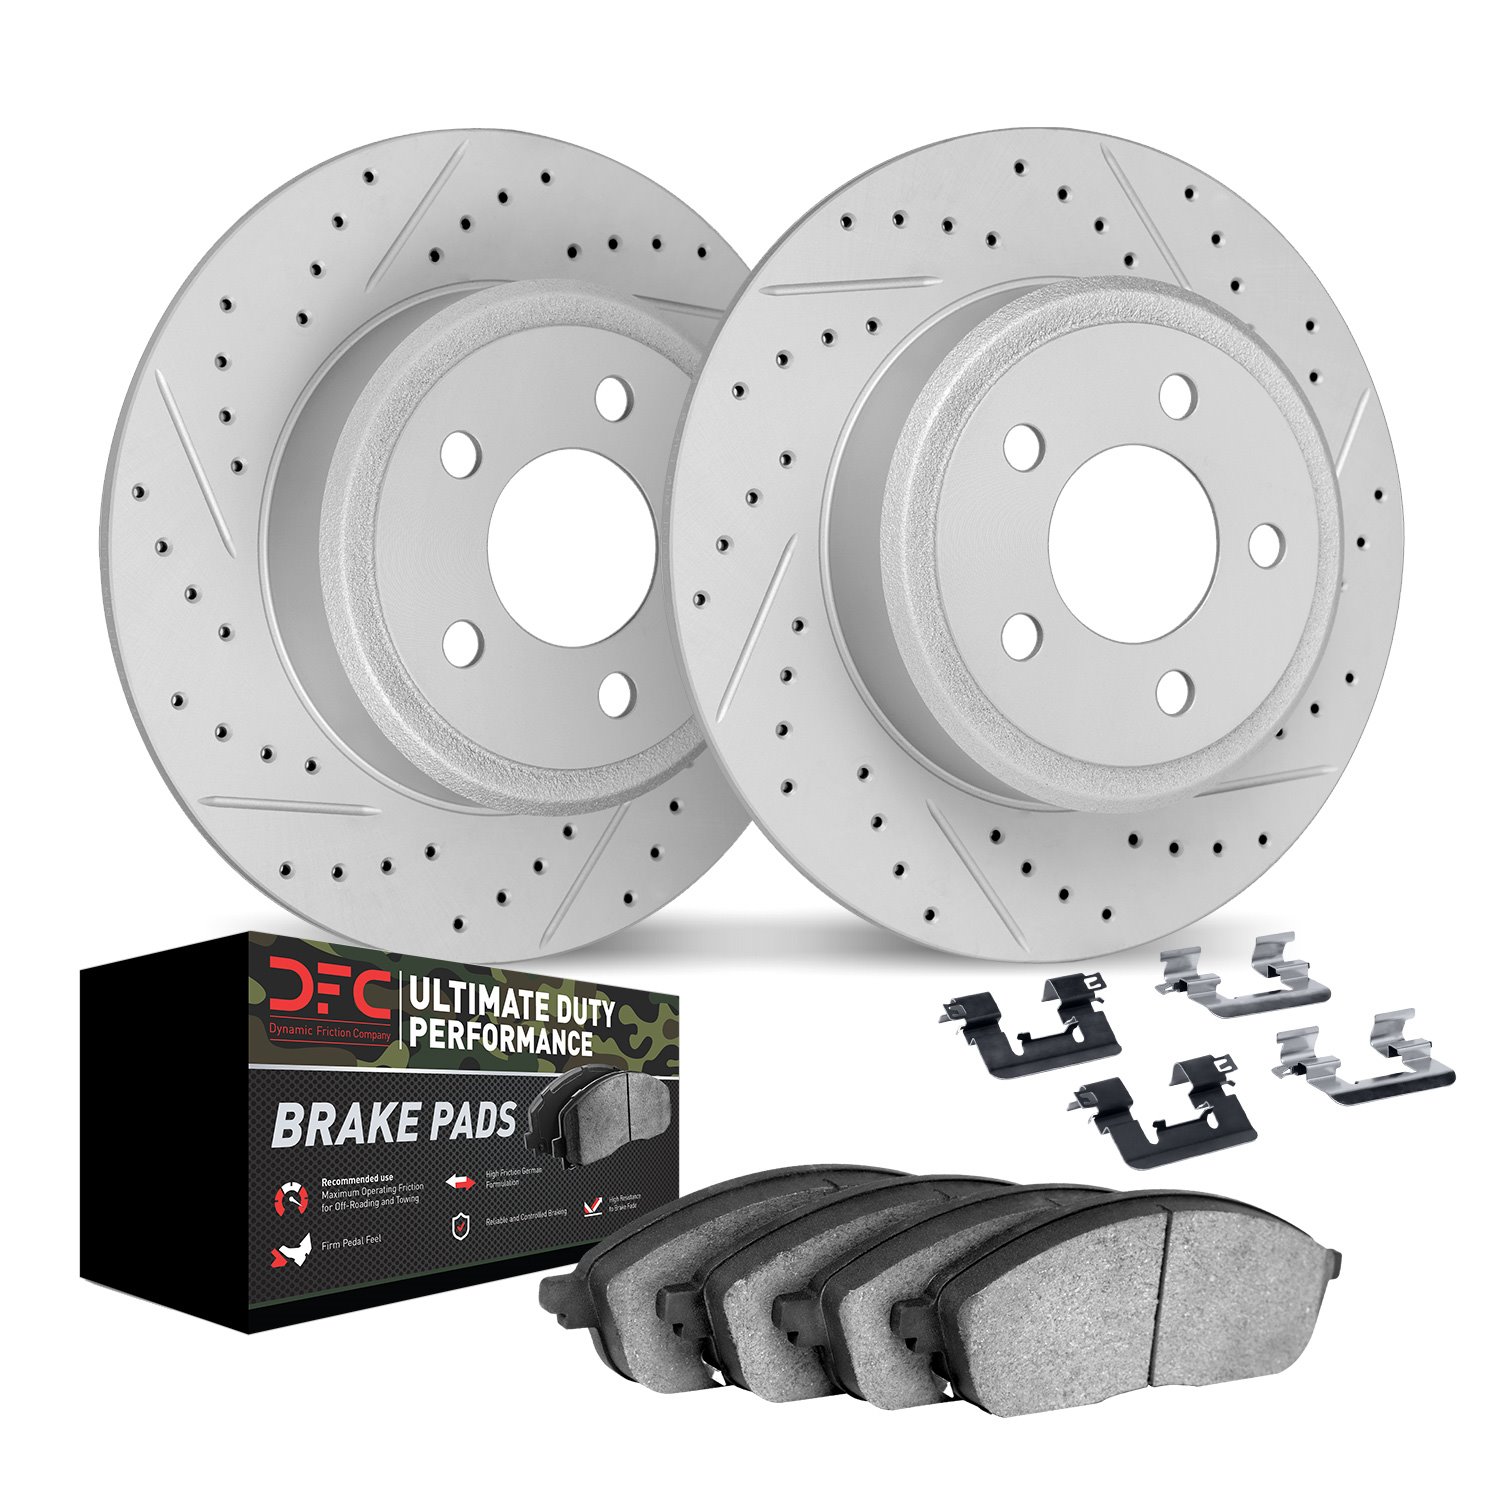 2412-54040 Geoperformance Drilled/Slotted Brake Rotors with Ultimate-Duty Brake Pads Kit & Hardware, 2002-2005 Ford/Lincoln/Merc